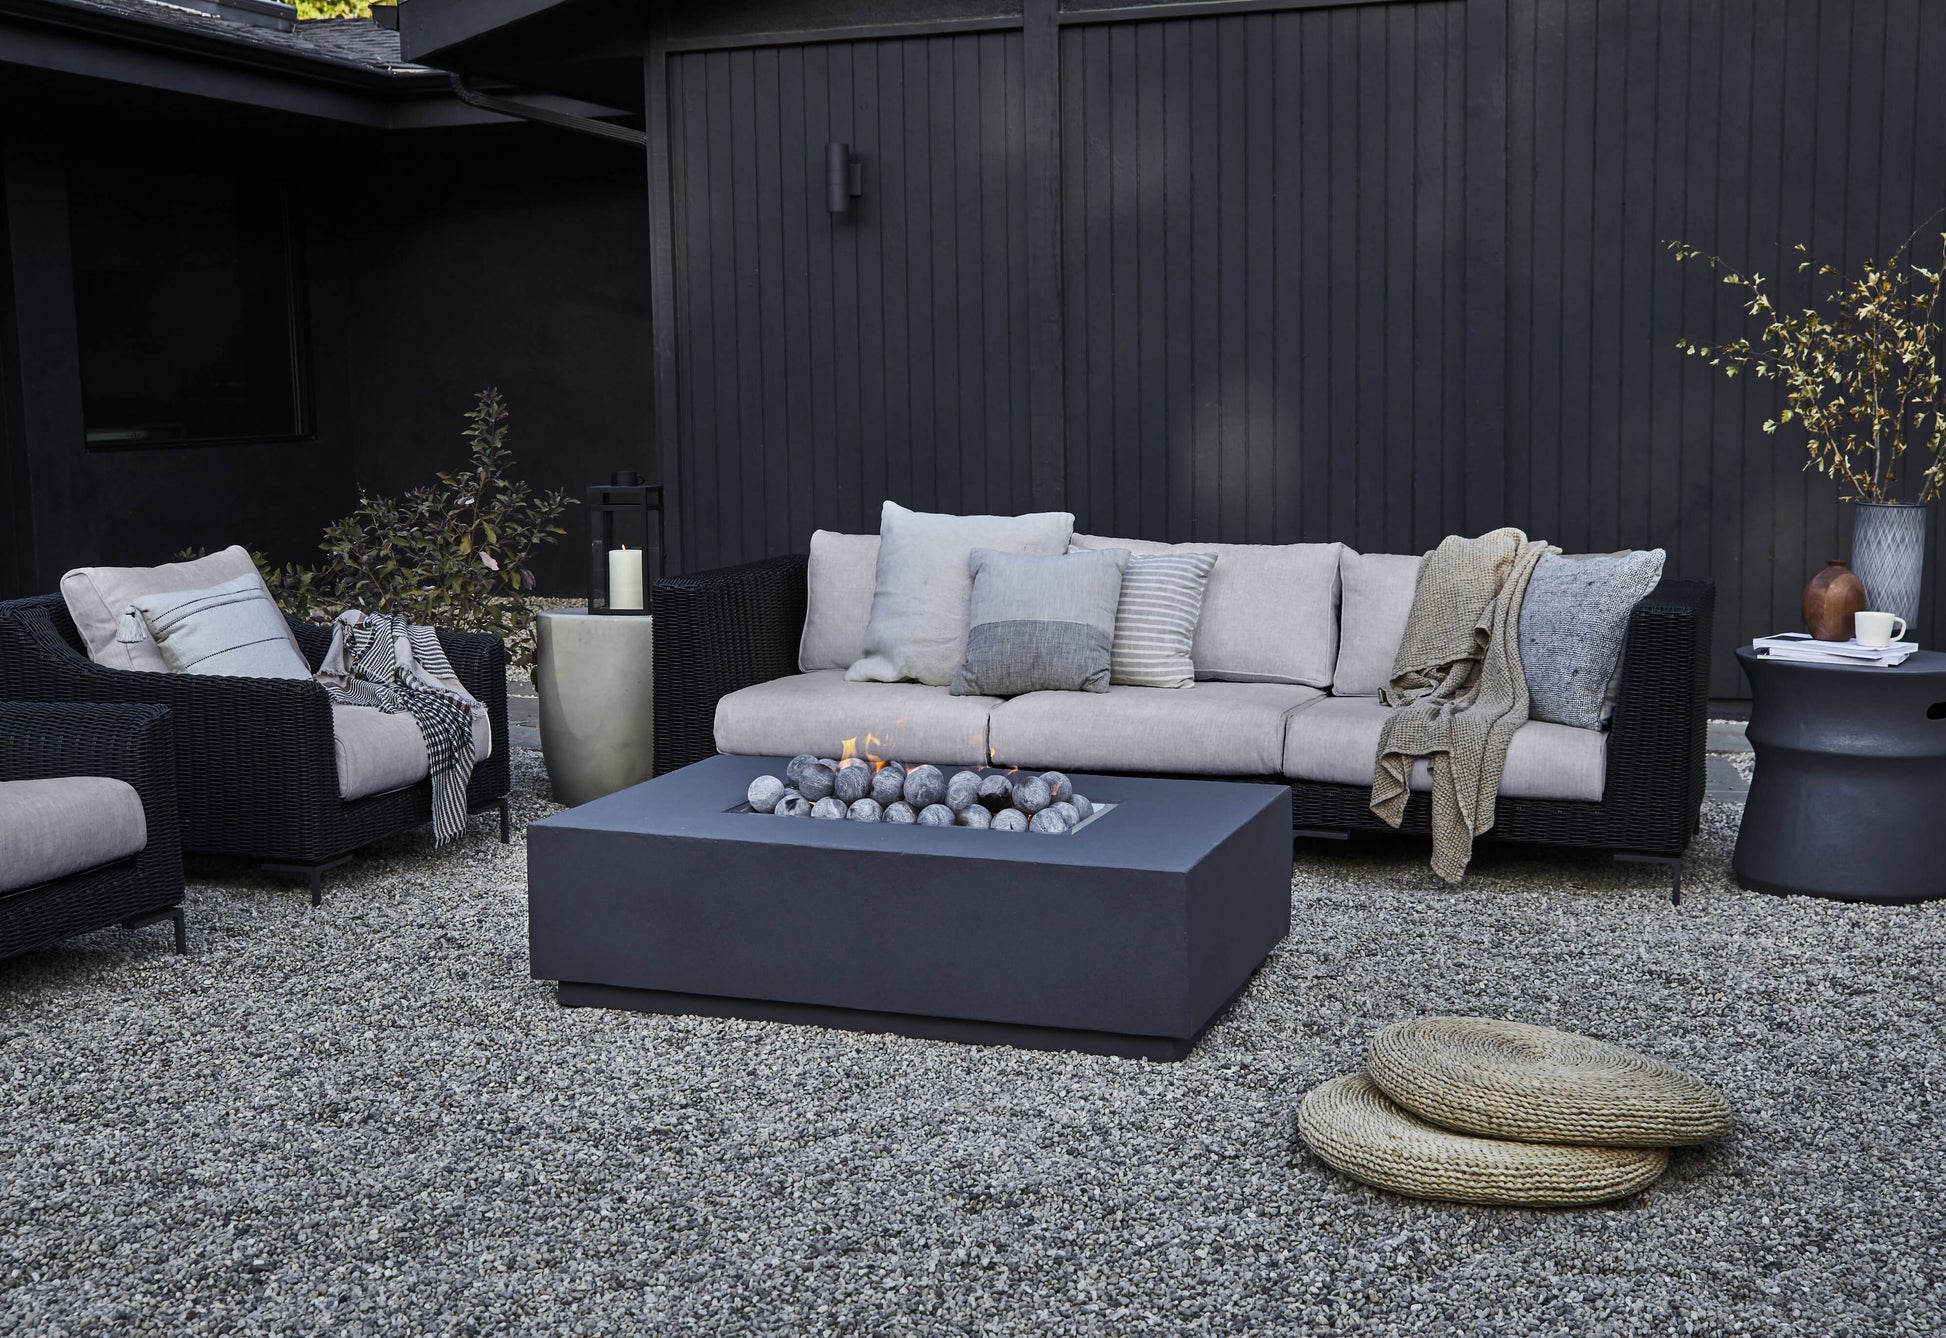 Live Outer 132" x 66" Black Wicker Outdoor U Sectional 6-Seat With Sandstone Gray Cushion